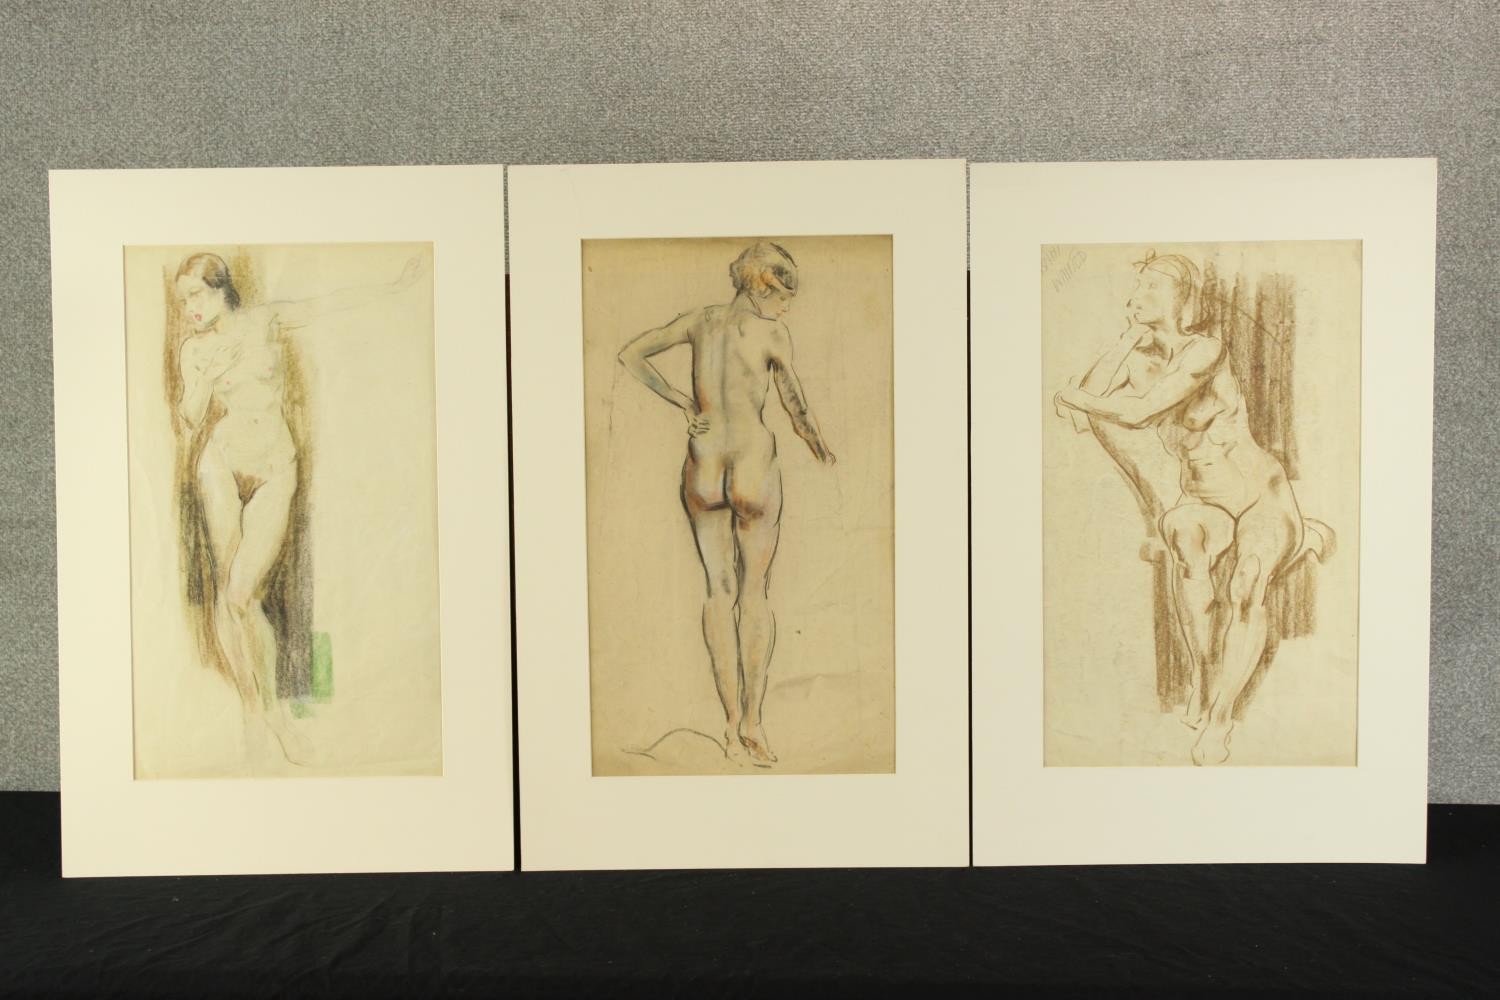 Late 19th/early 20th century, three nude pencil drawings of females, each on paper and unframed. H.